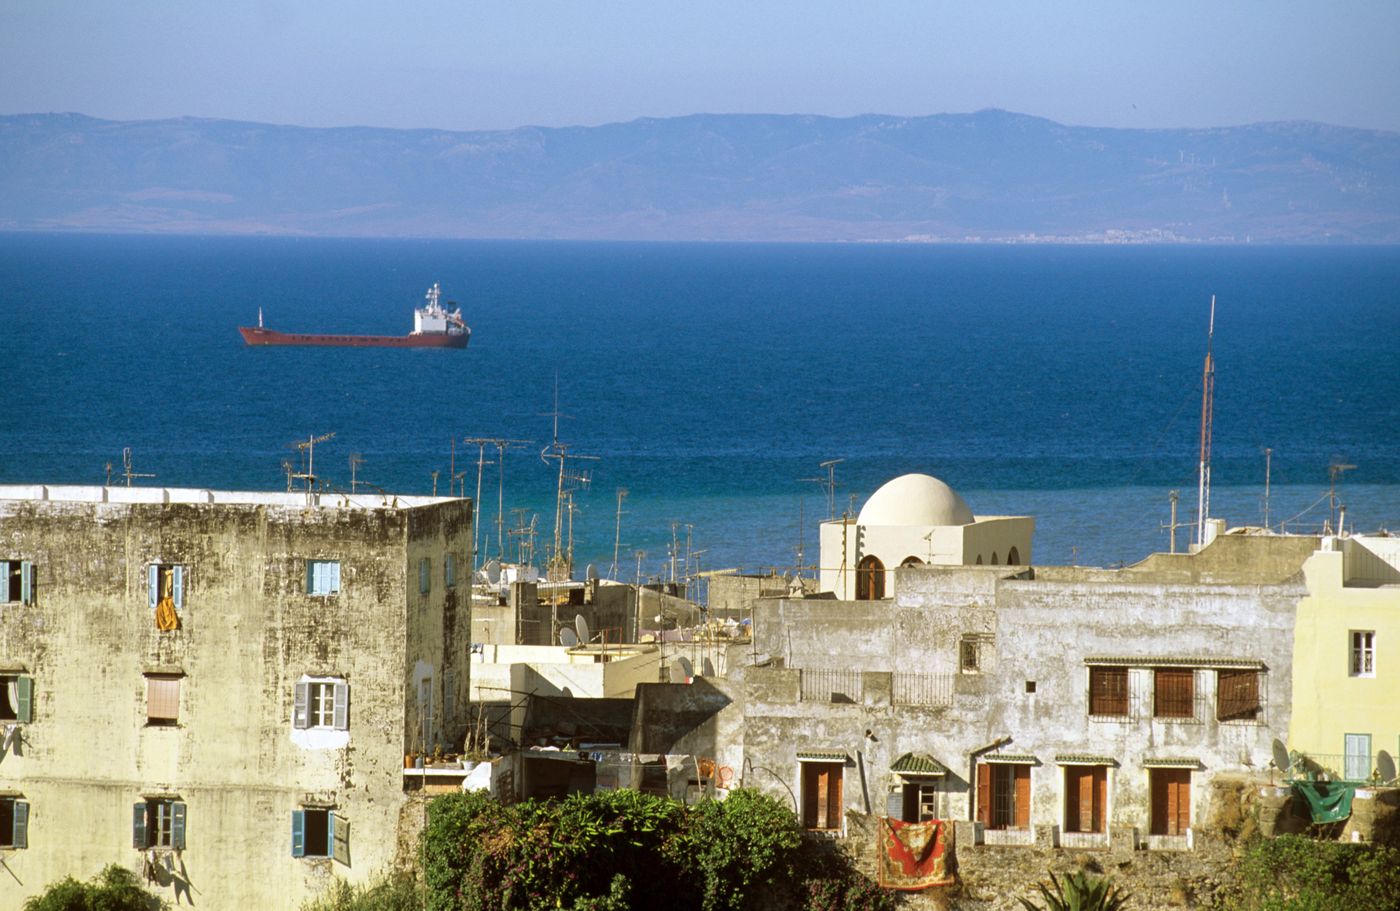 View from Tangier, Morocco: The Strait of Gibraltar with the Spanish coast in the background, connecting the Atlantic Ocean to the Mediterranean Sea.